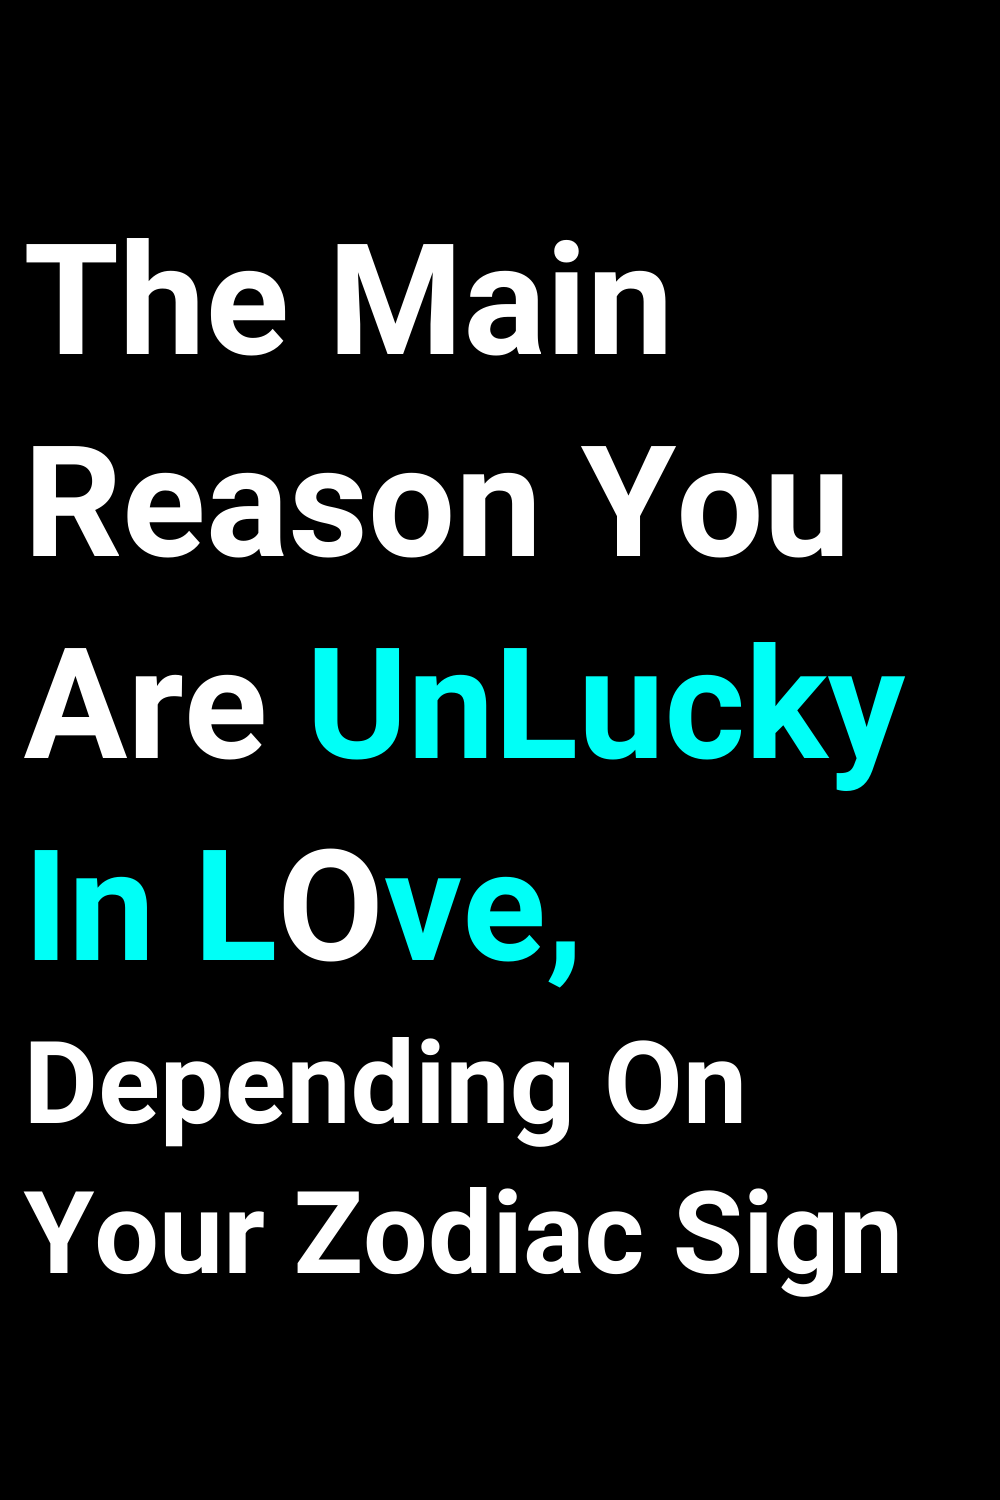 The Main Reason You Are Unlucky In Love, Depending On Your Zodiac Sign